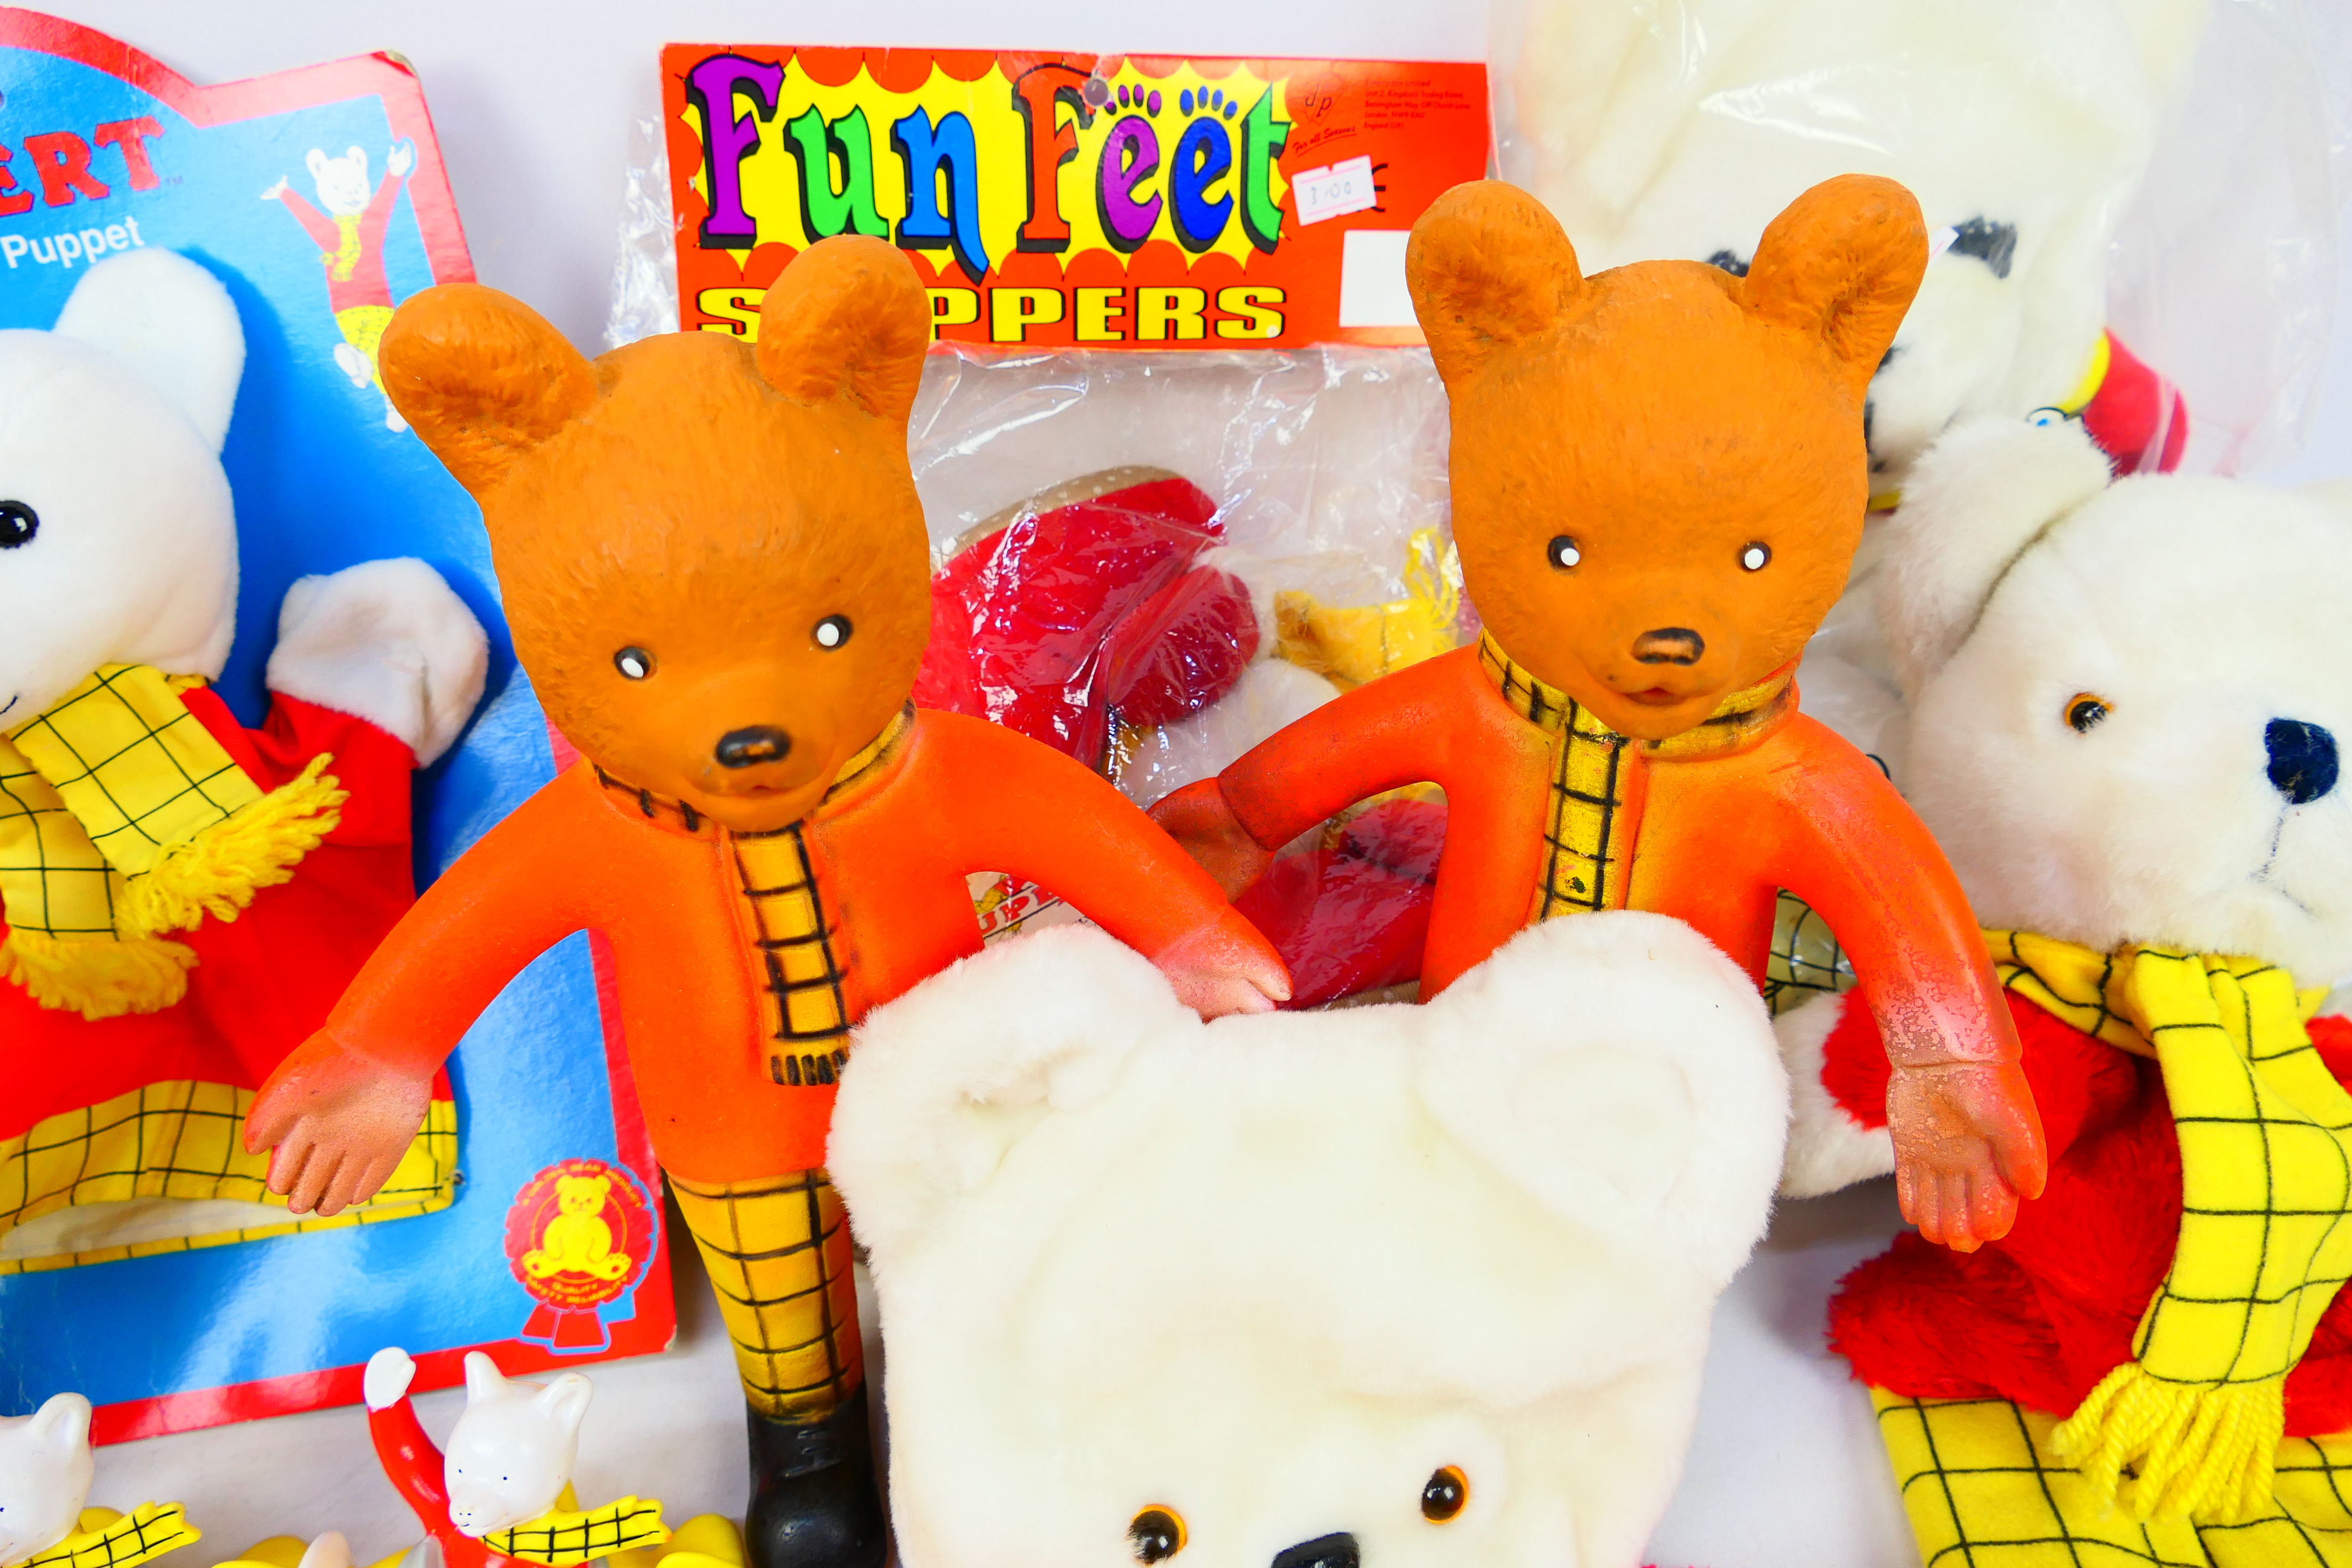 Golden Bear - Boots - Others - A group of Rupert the Bear themed toys, and novelty items, - Image 5 of 8